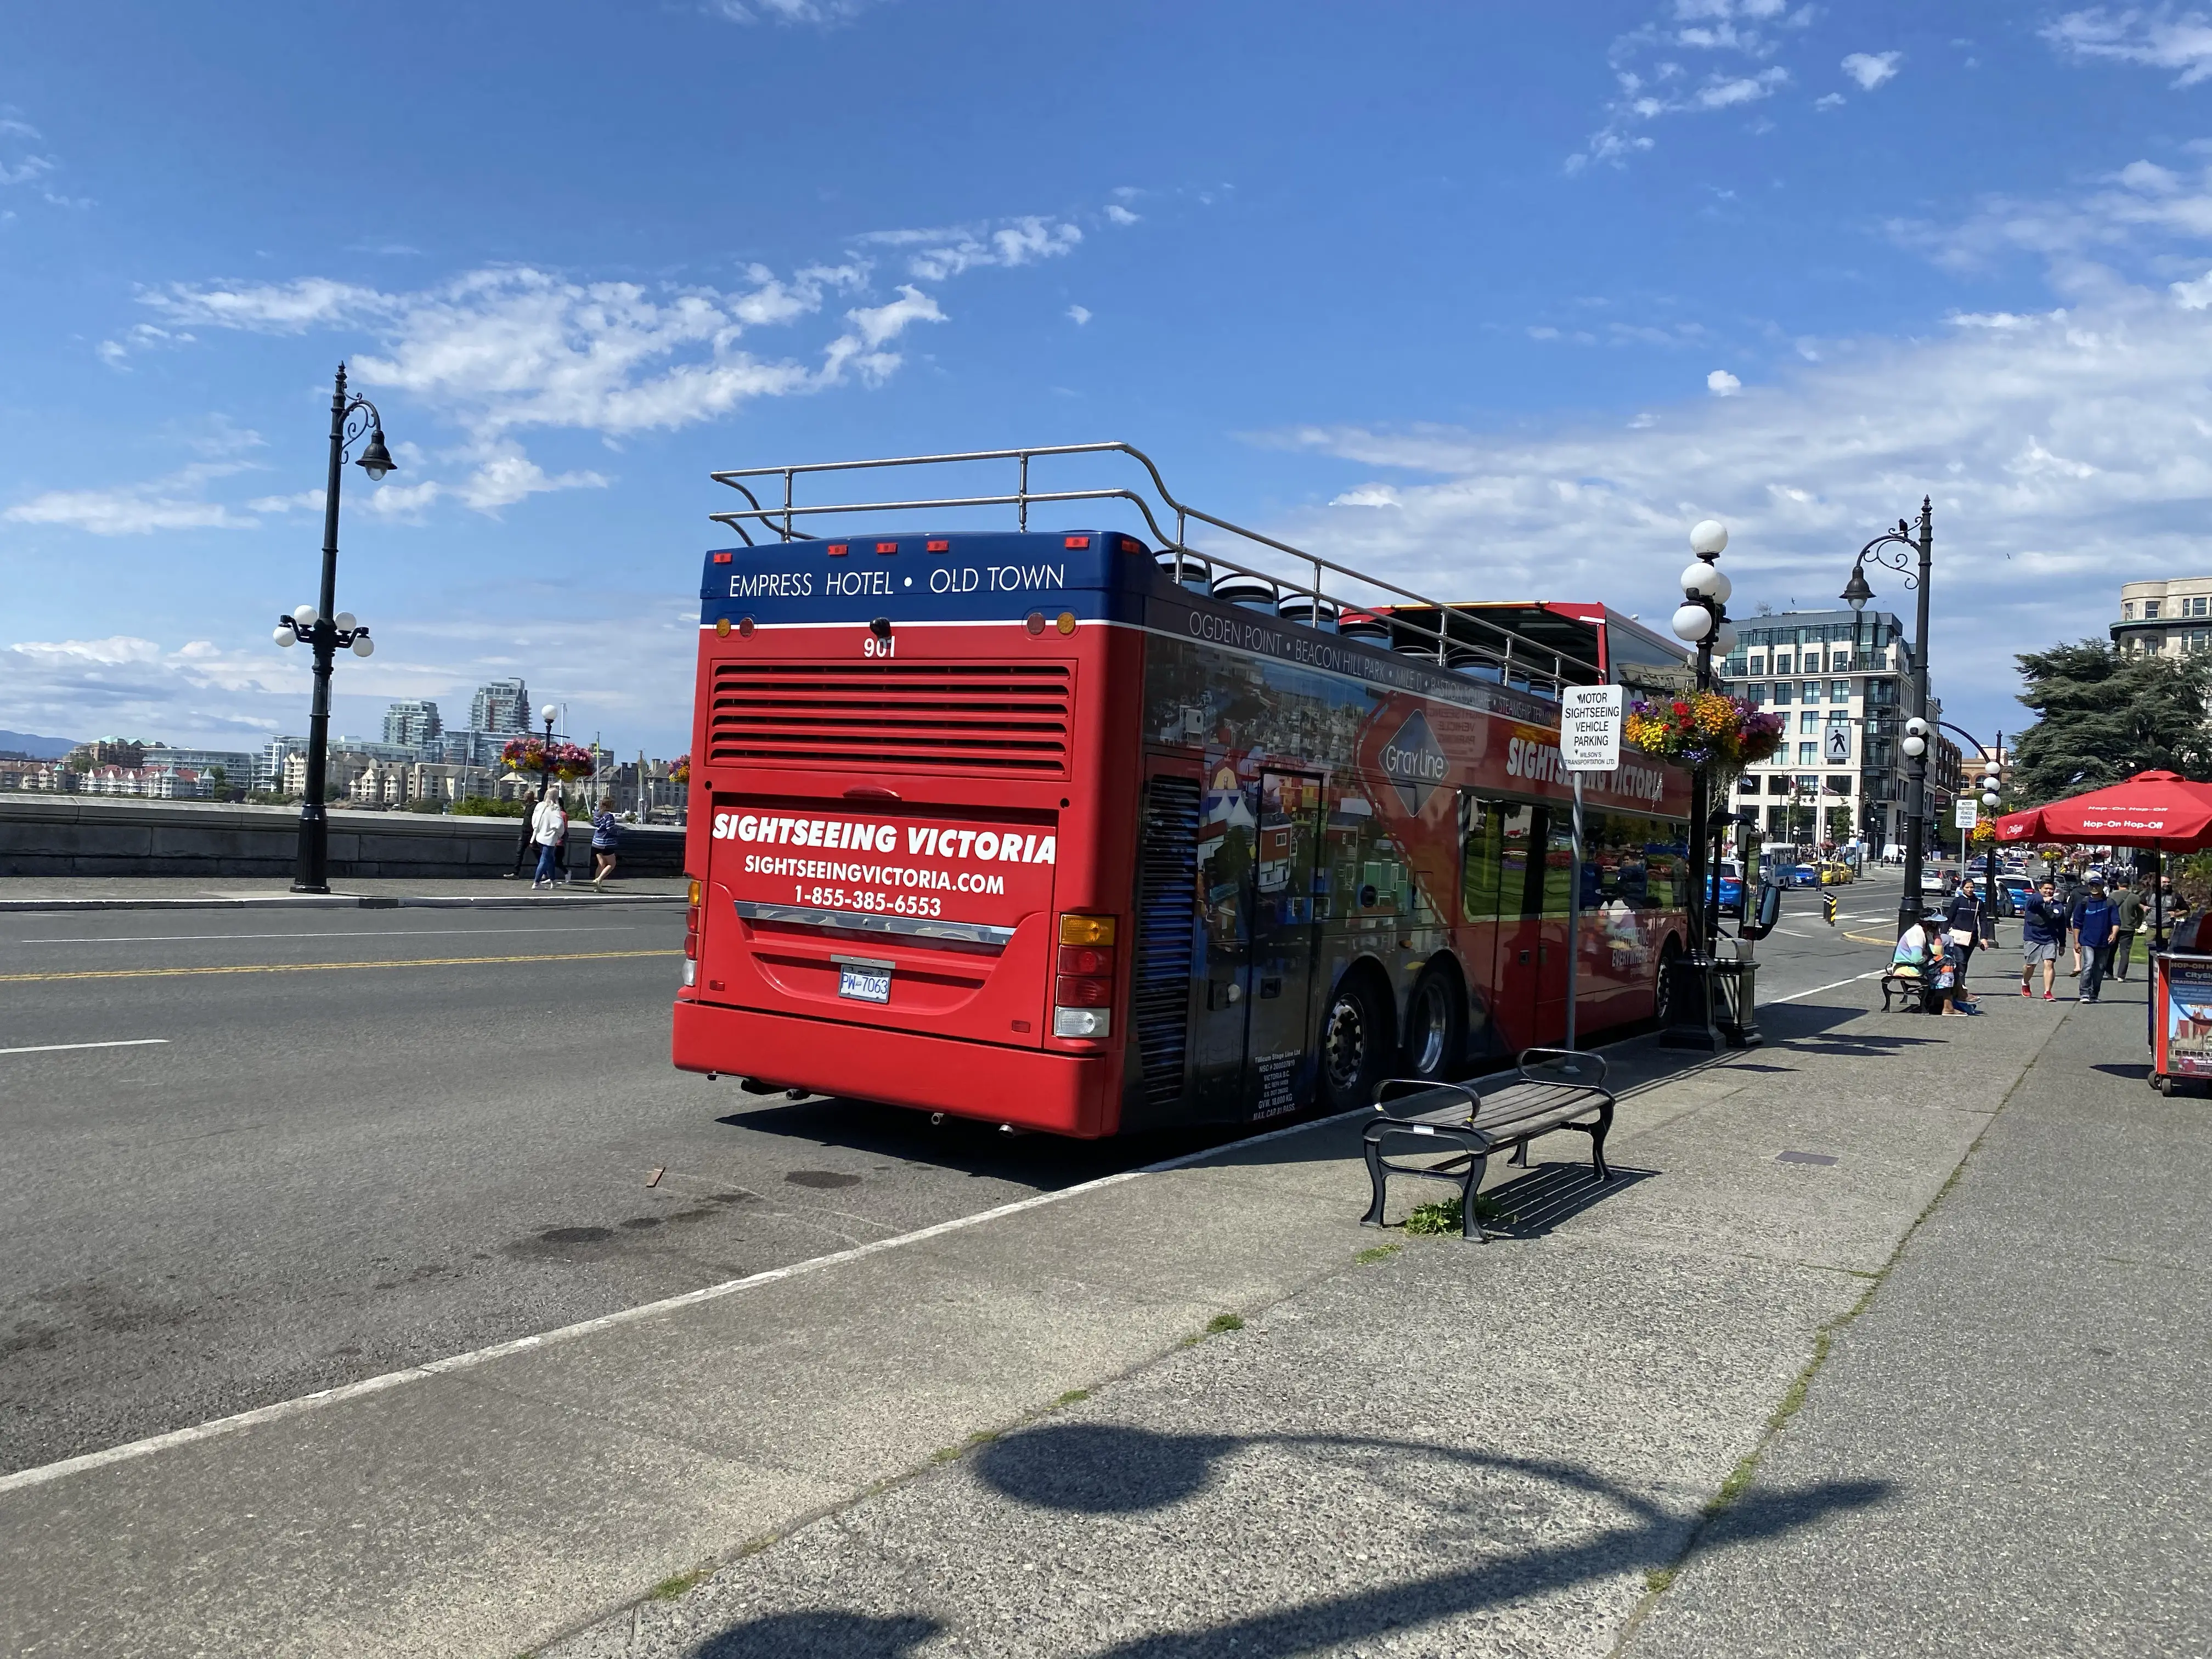 A hop-on hop-off sightseeing bus in downtown Victoria, BC